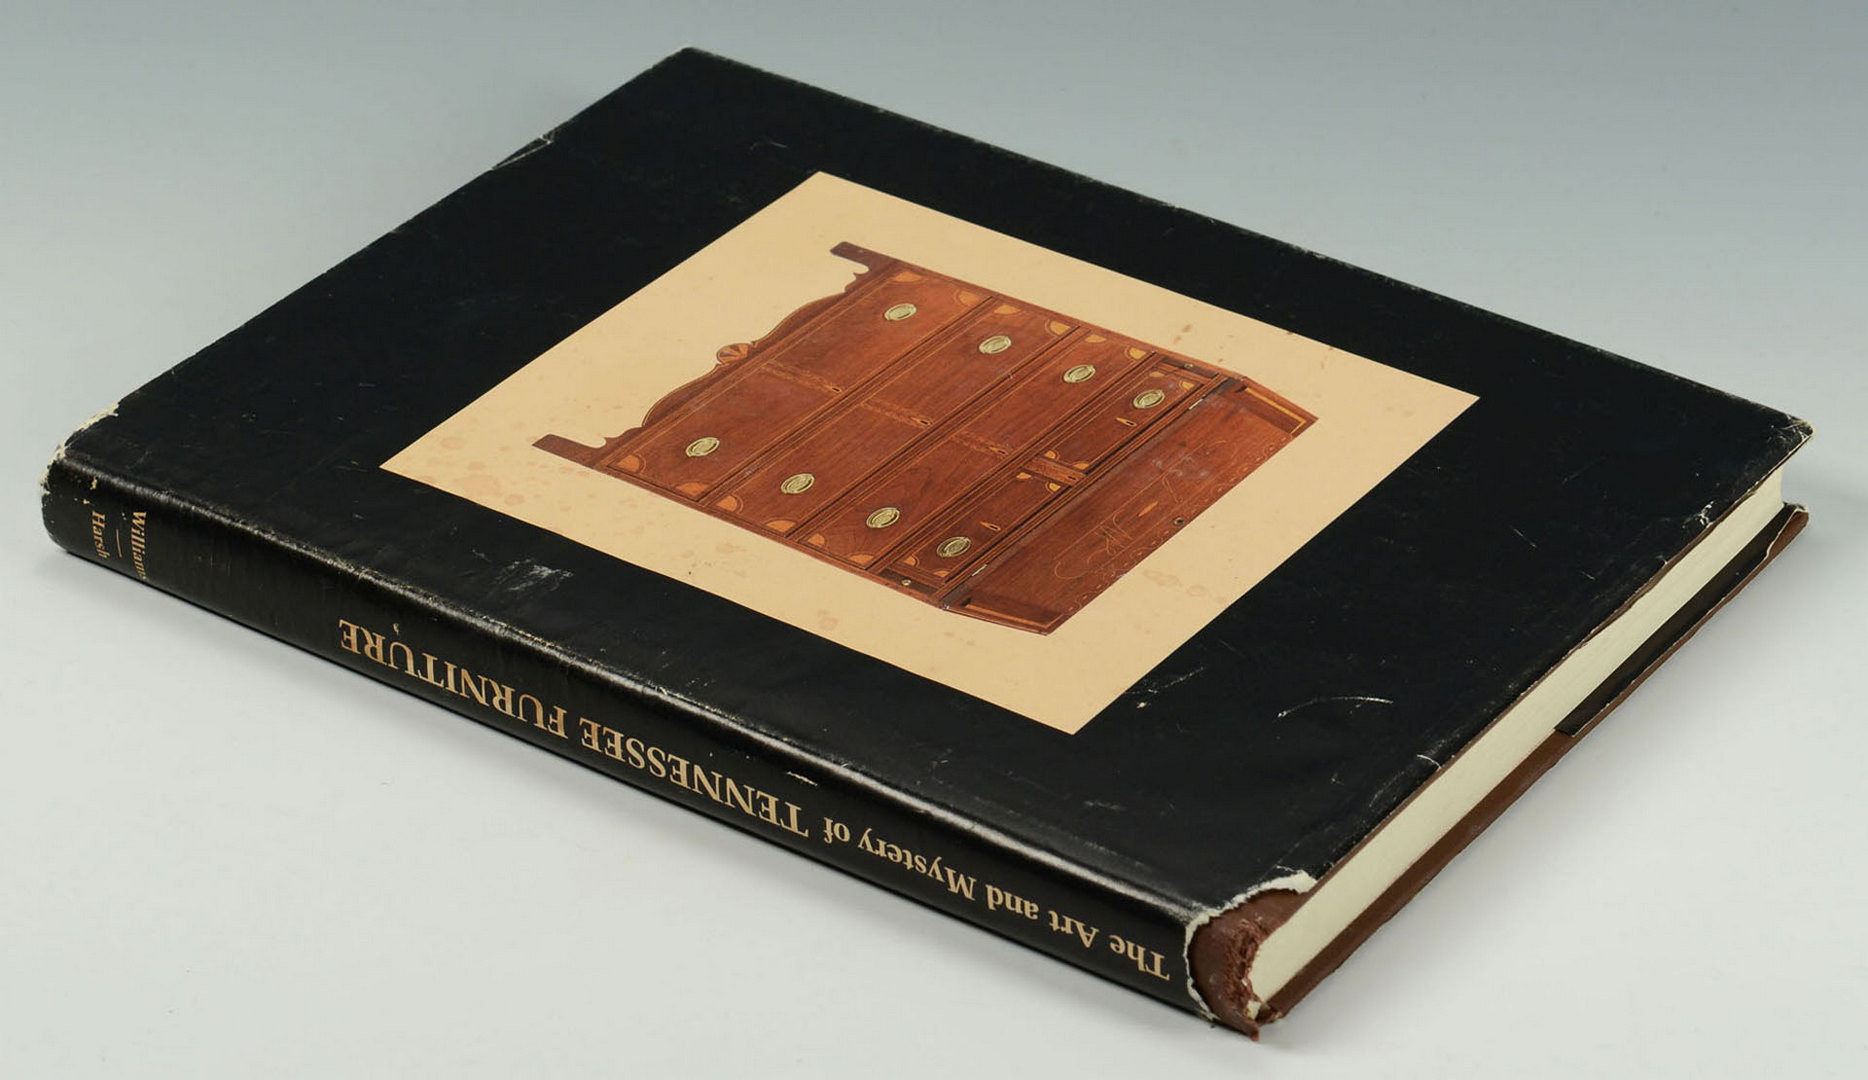 Lot 710: The Art and Mystery of Tennessee Furniture Book